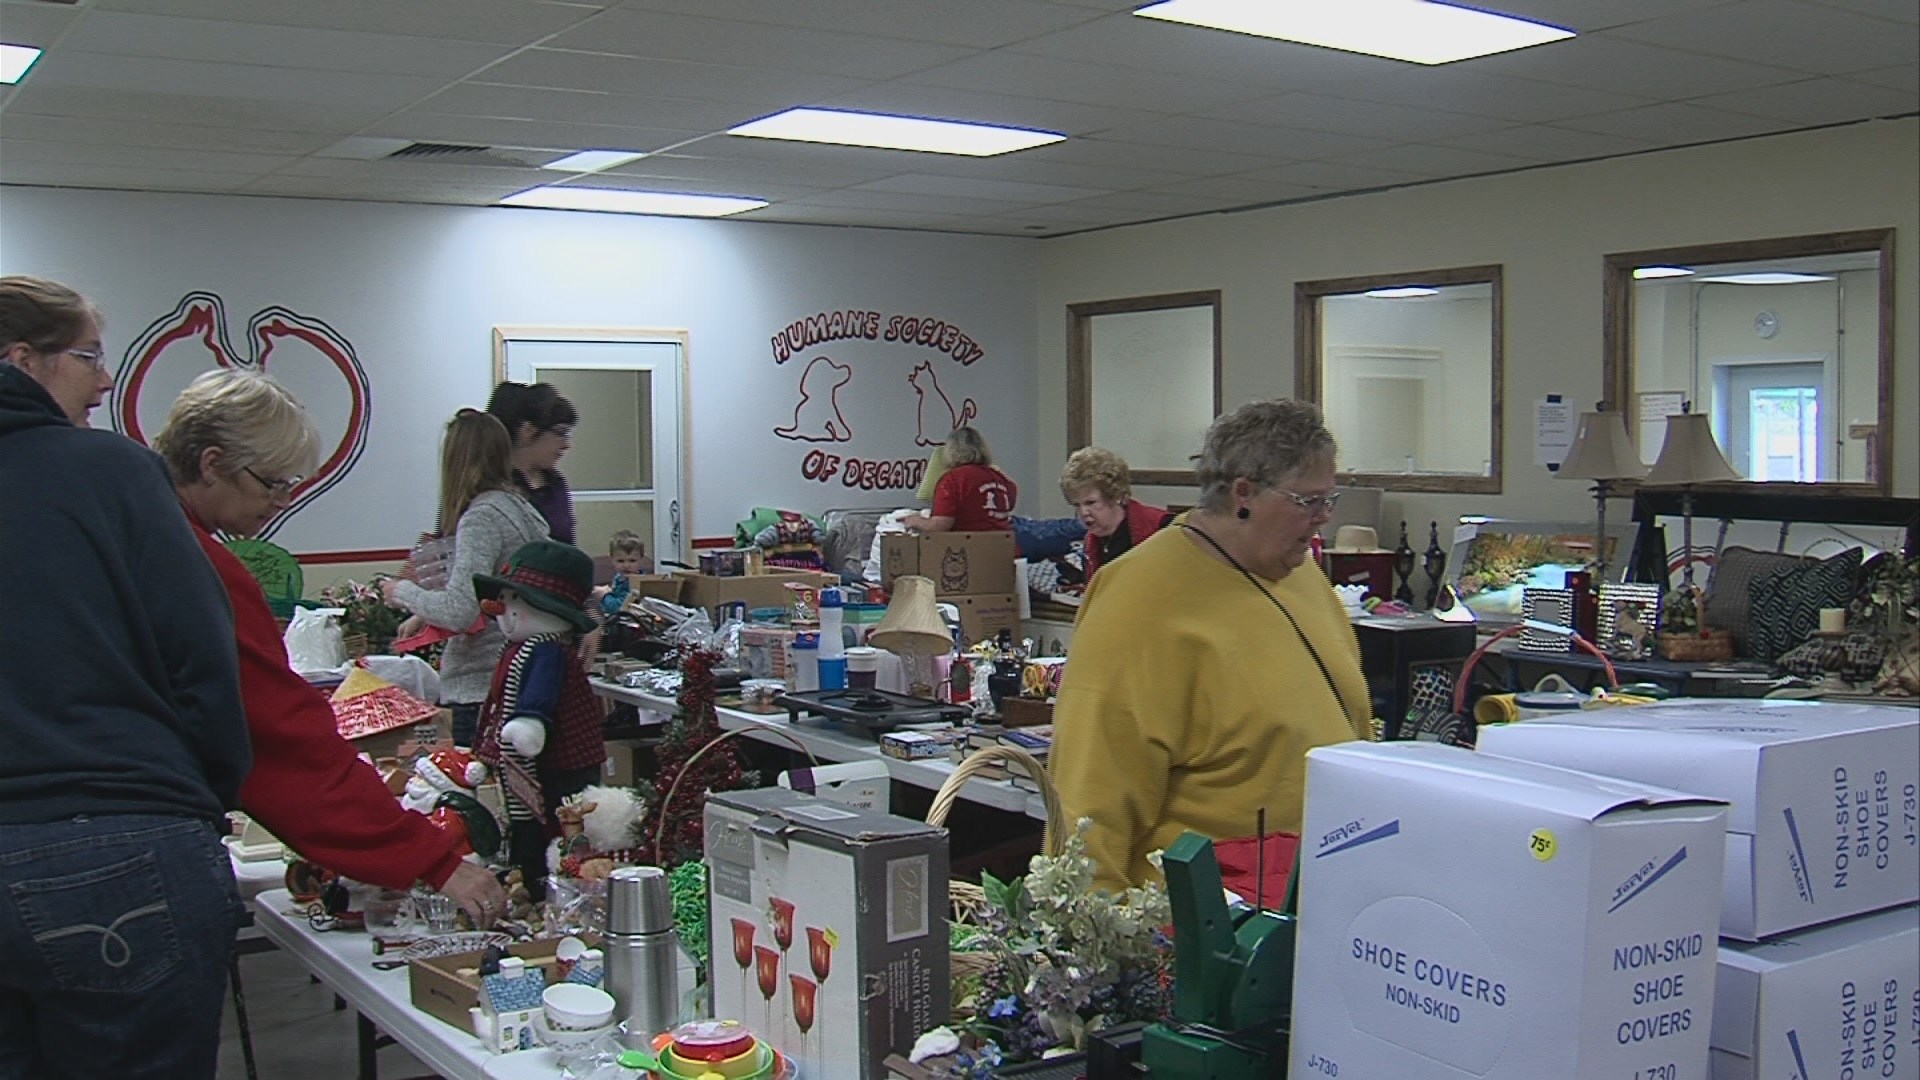 Humane Society of Decatur & Macon County Hosts Annual Rummage Sale